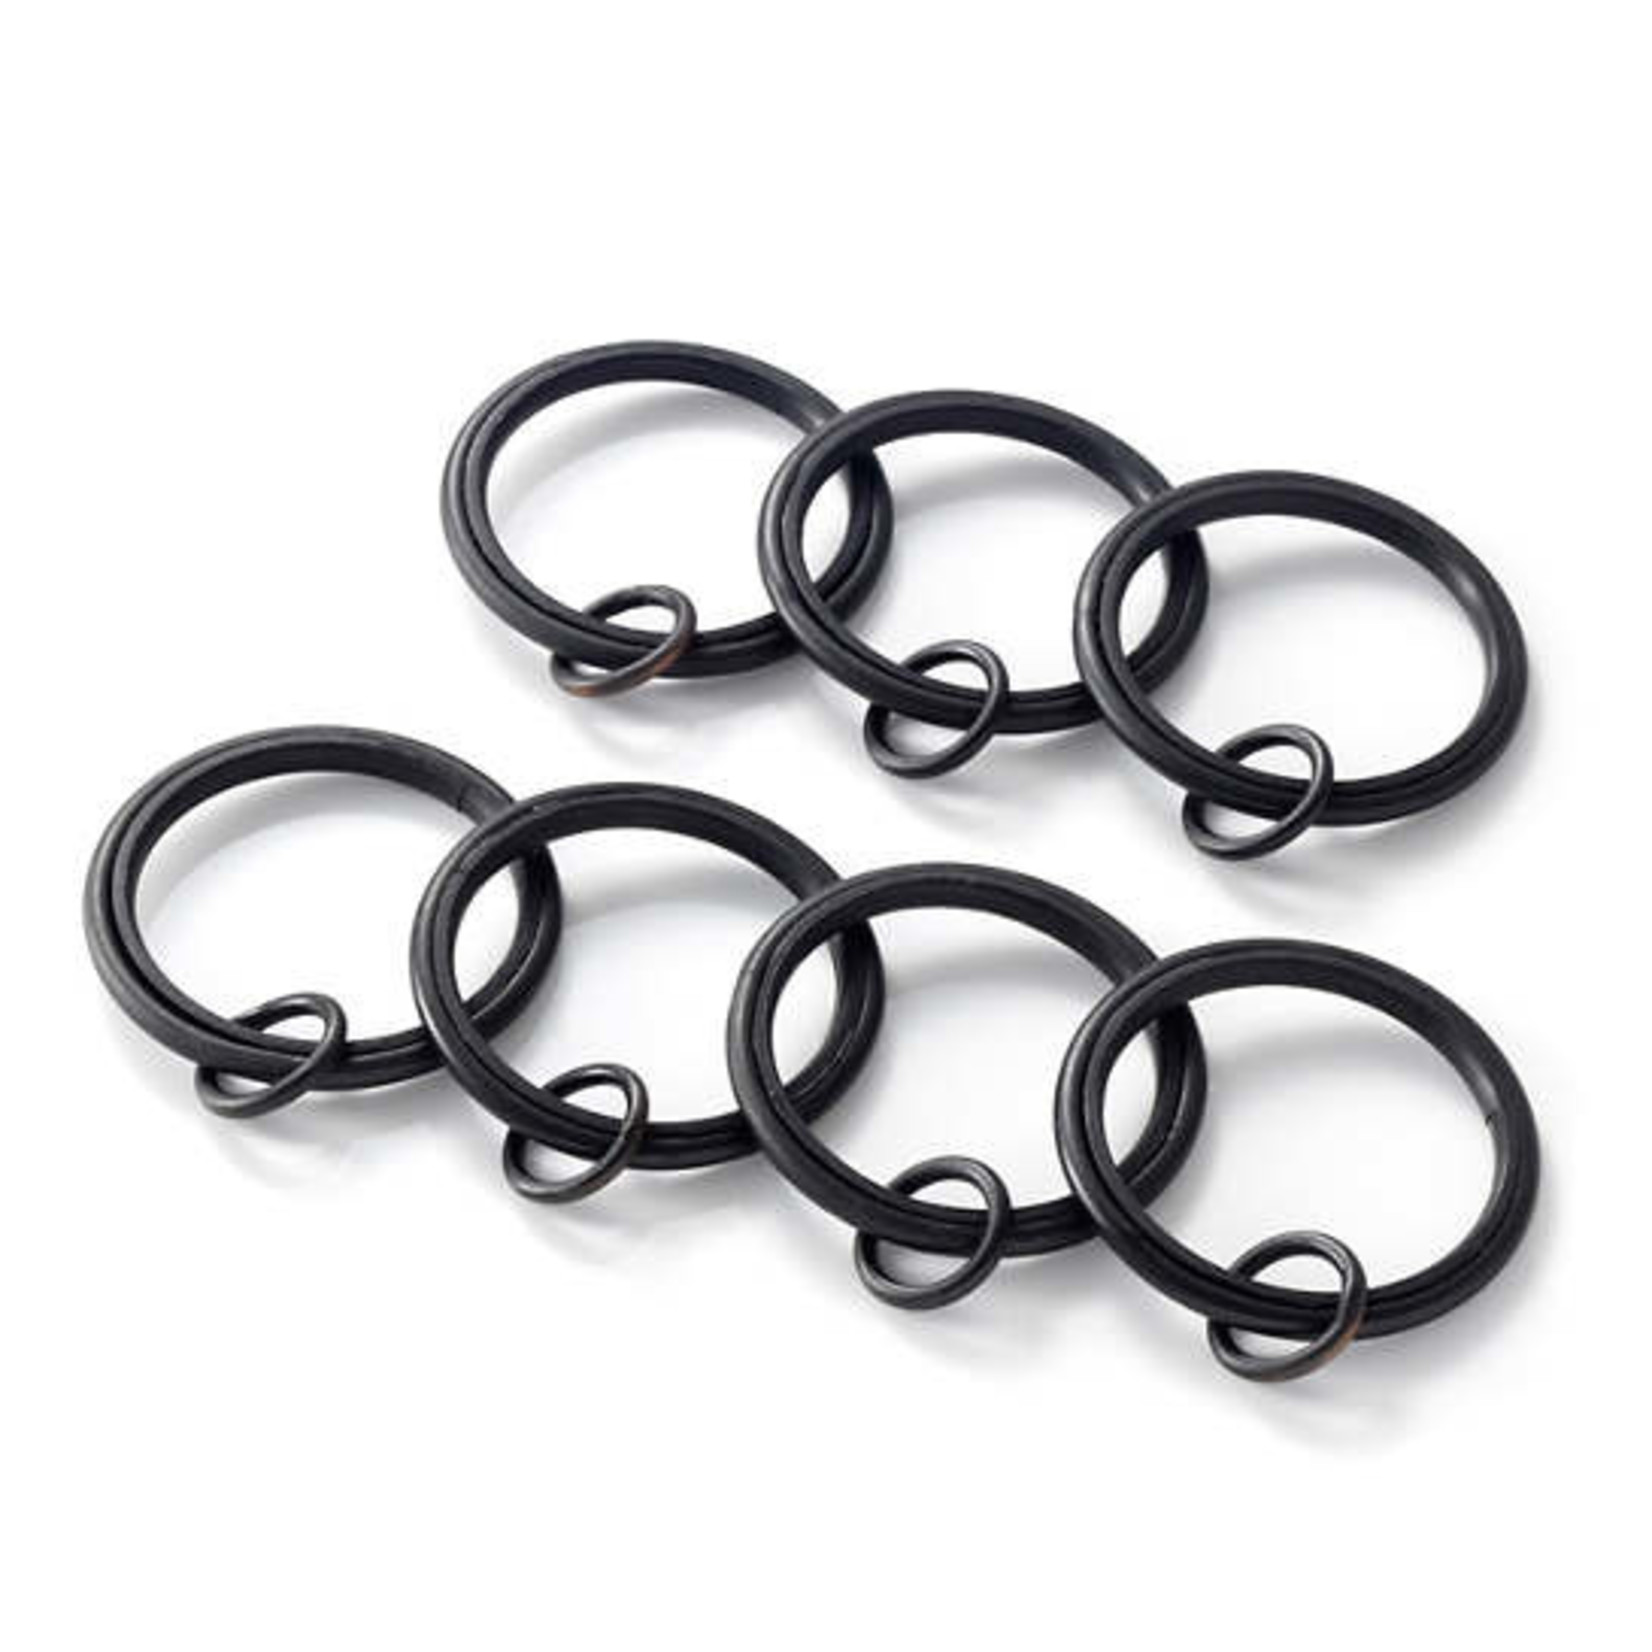 Curtain Loop Ring - Oil Rubbed Bronze